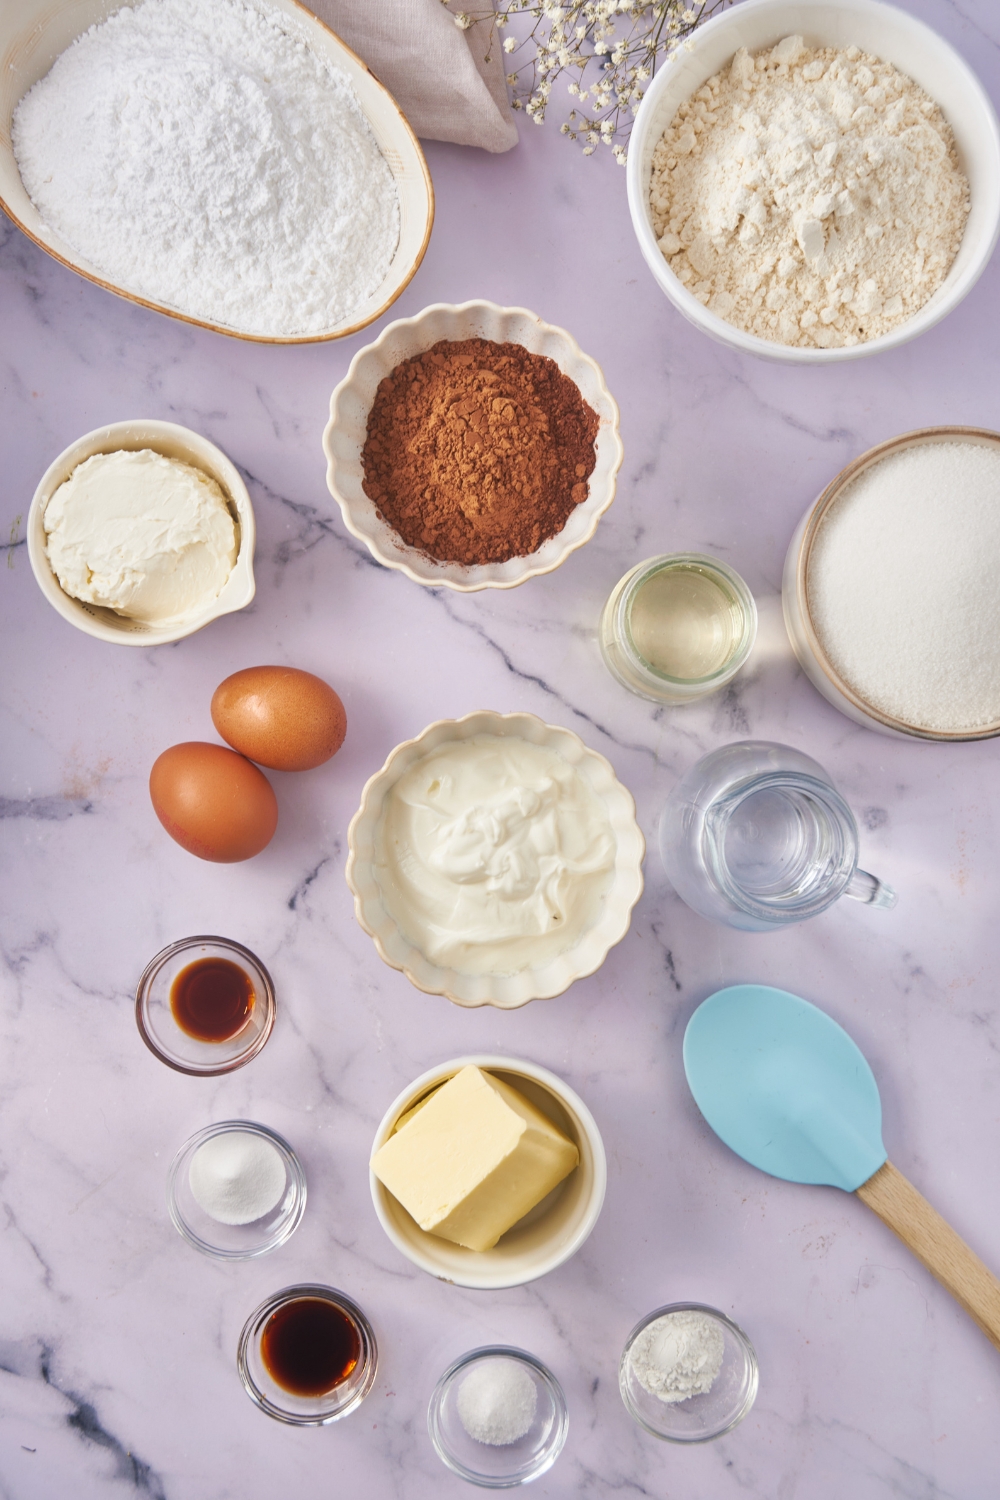 An assortment of ingredients including bowls of buttermilk, flour, cocoa powder, butter, vanilla extract, sugar, cream cheese, and two eggs.